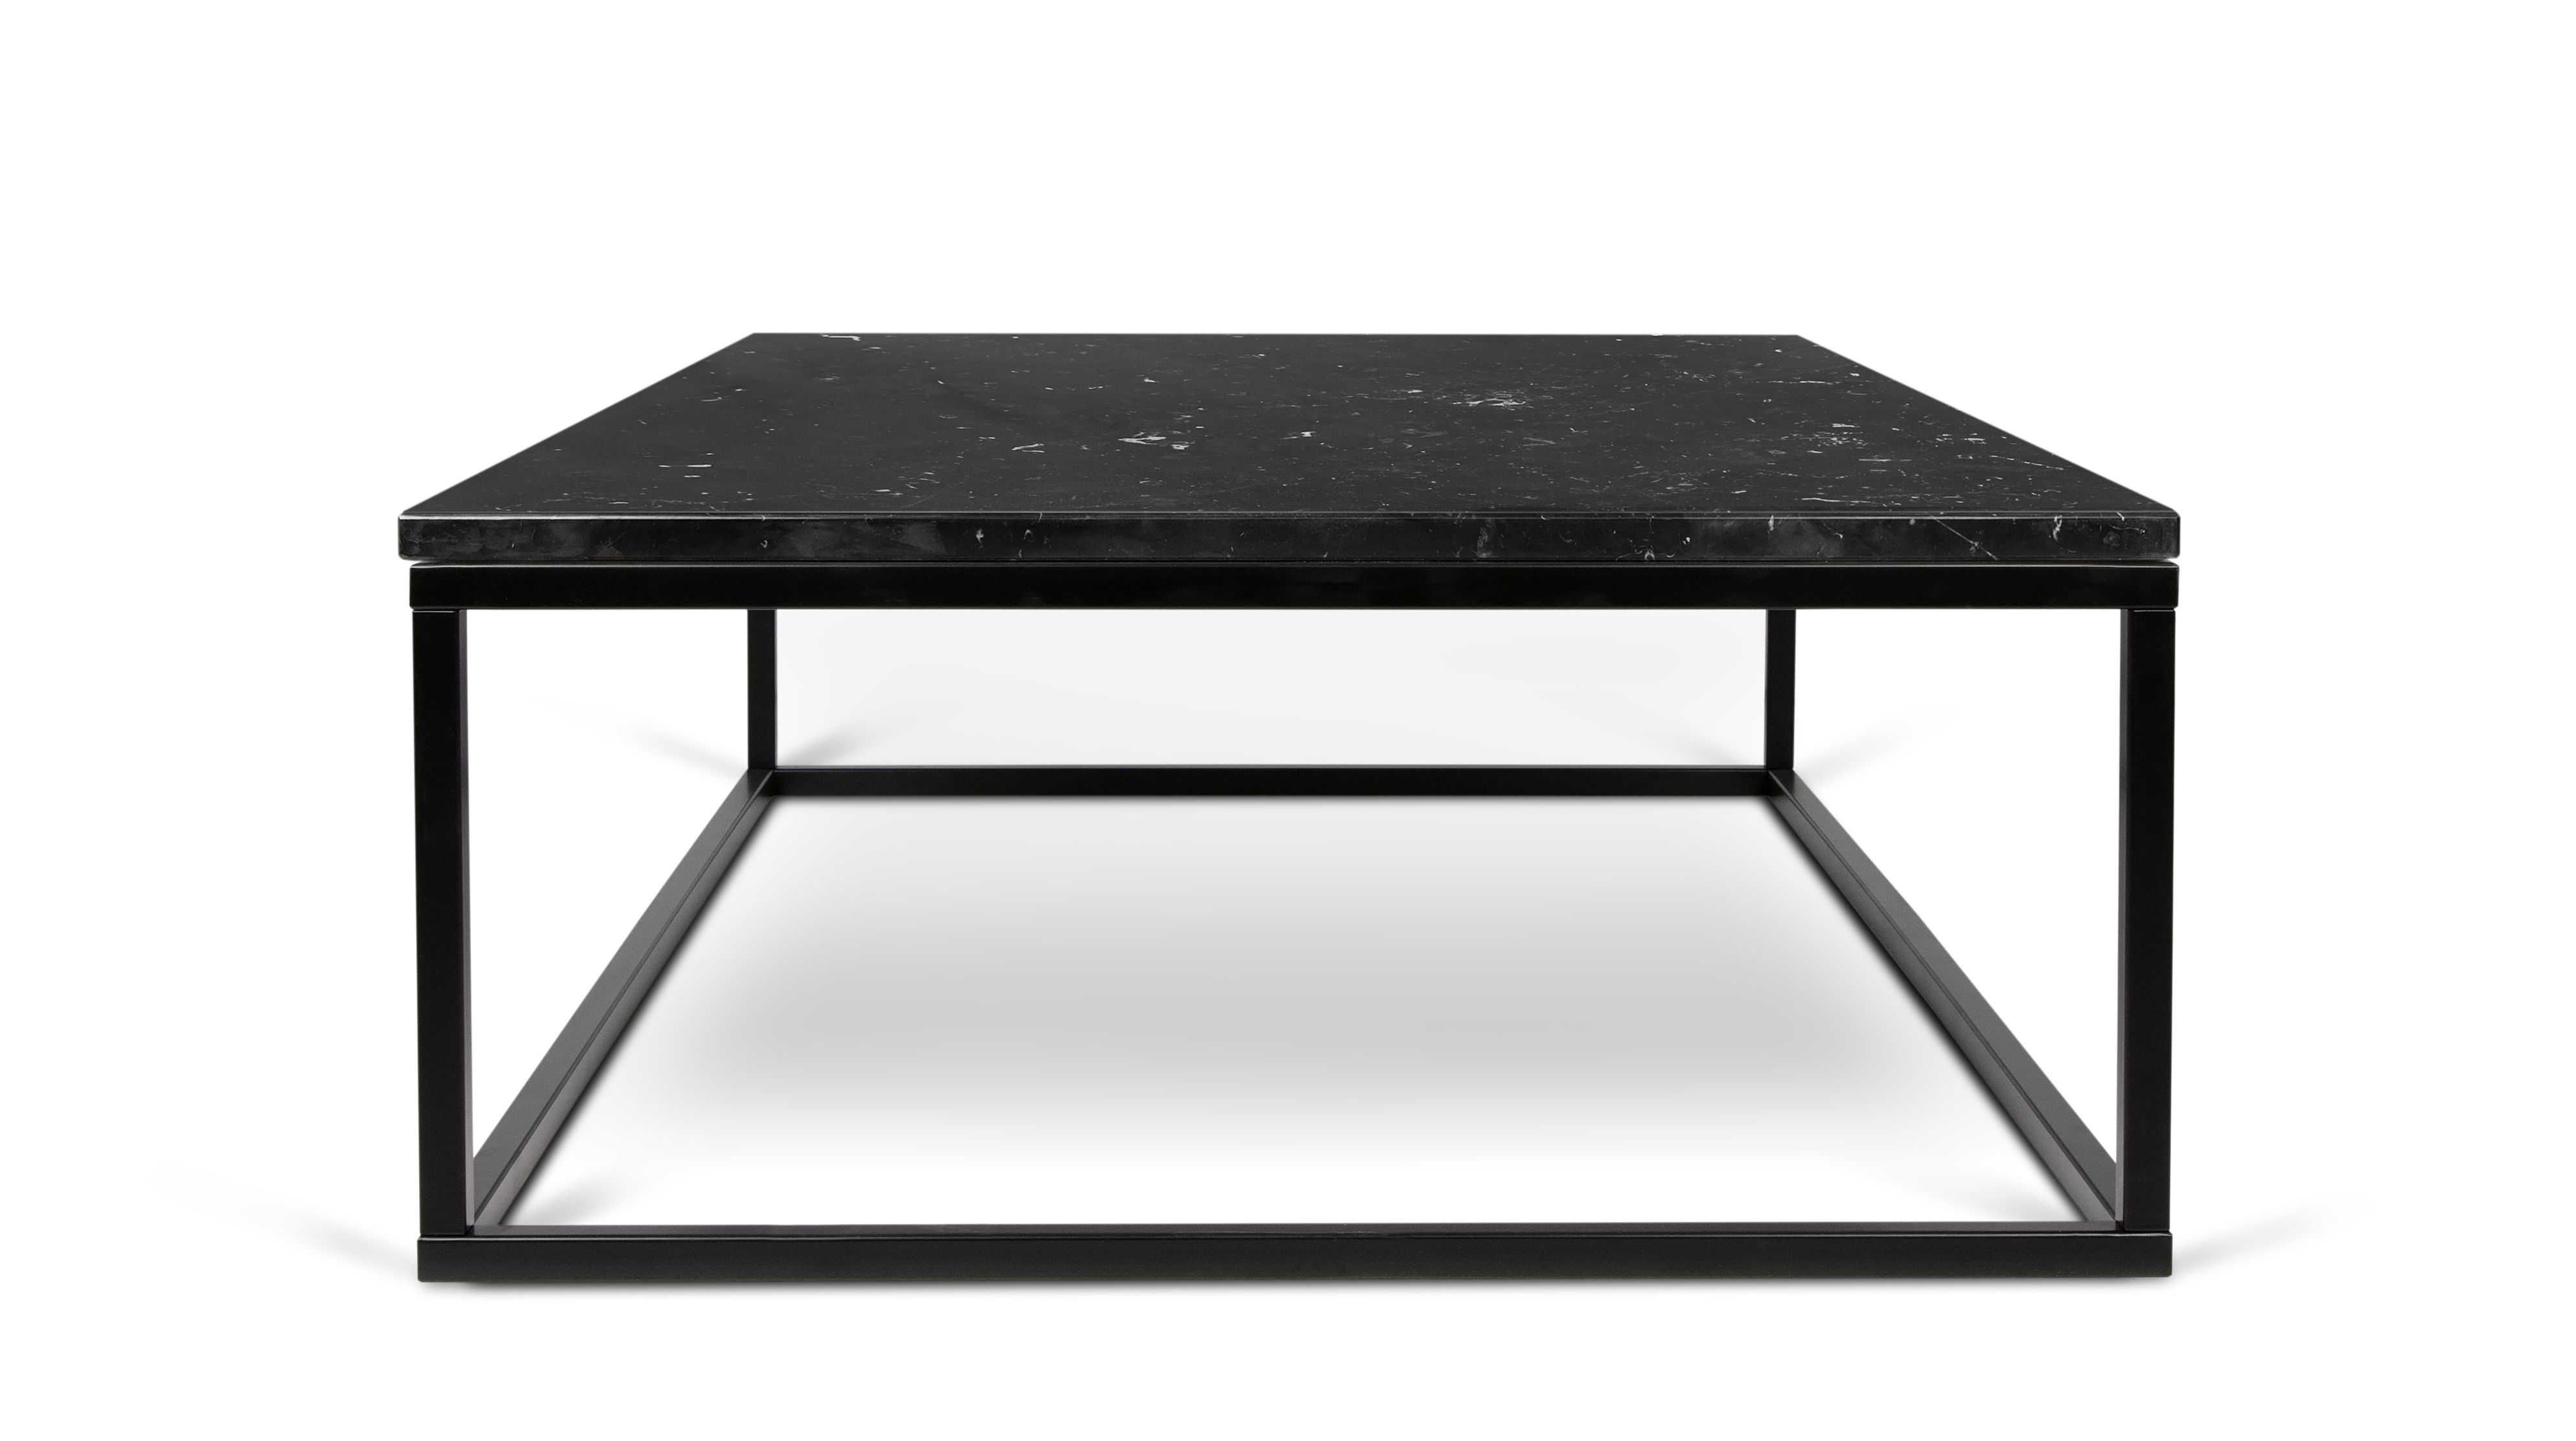 Prairie Marble coffee table by Pop Up Home